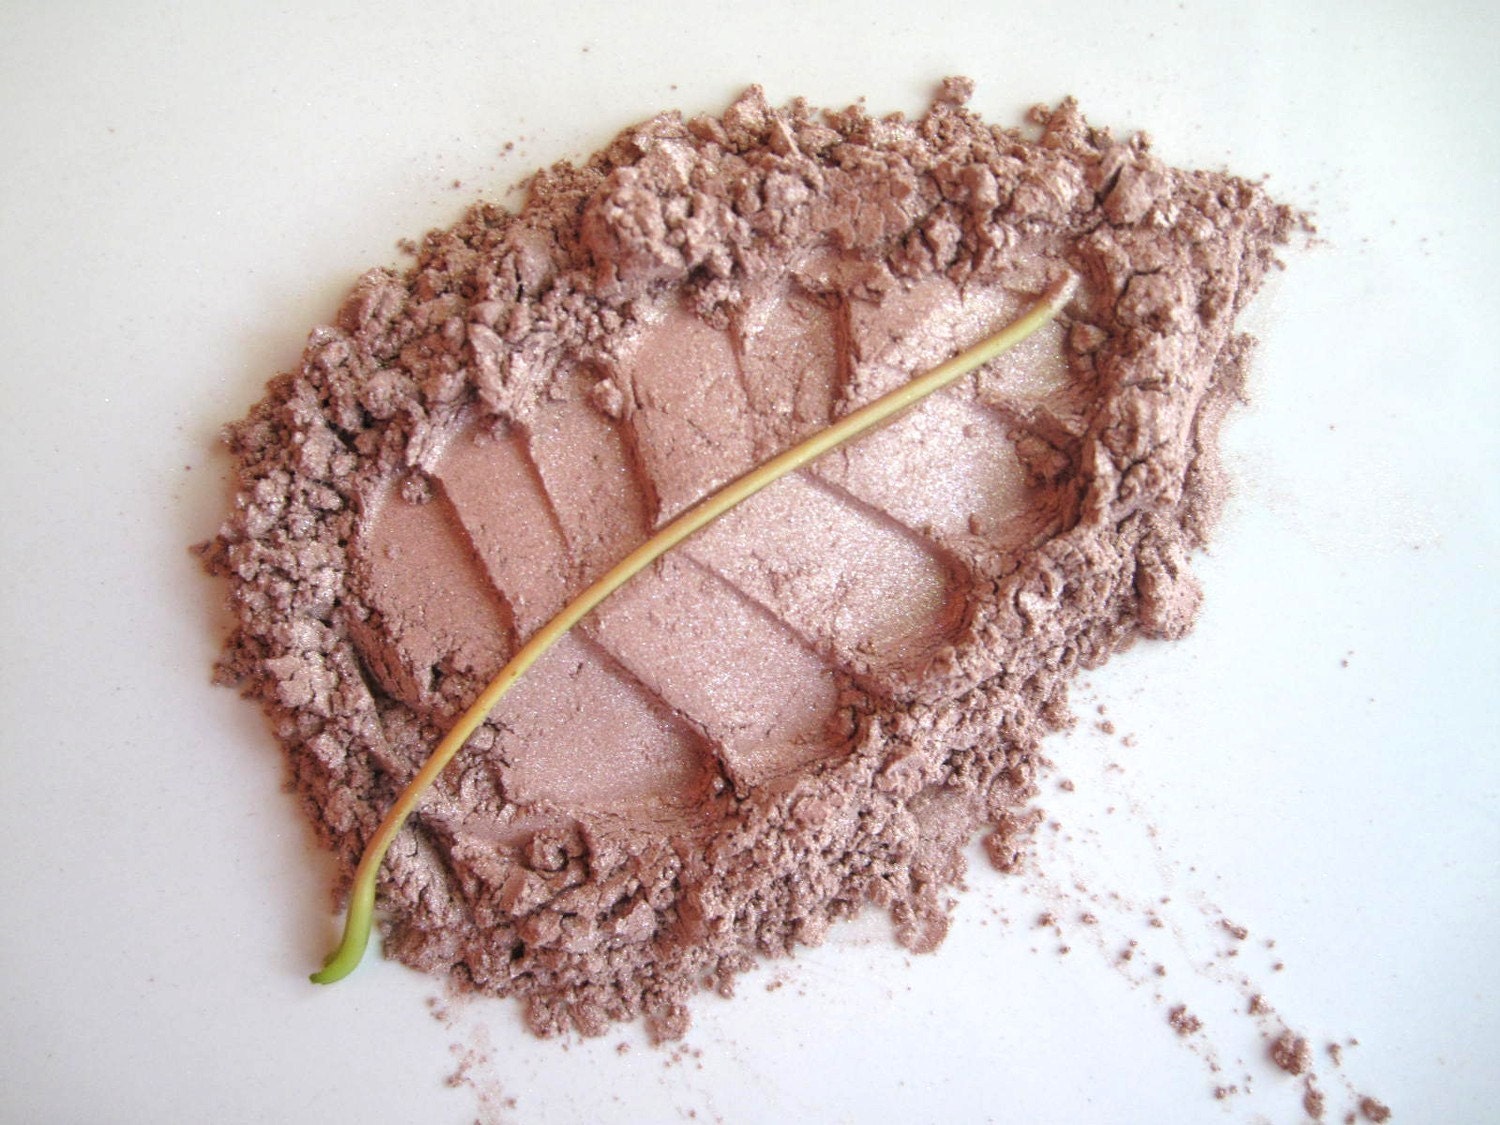 Soft Wildflower - Pure and Natural Mineral Eye Shadow